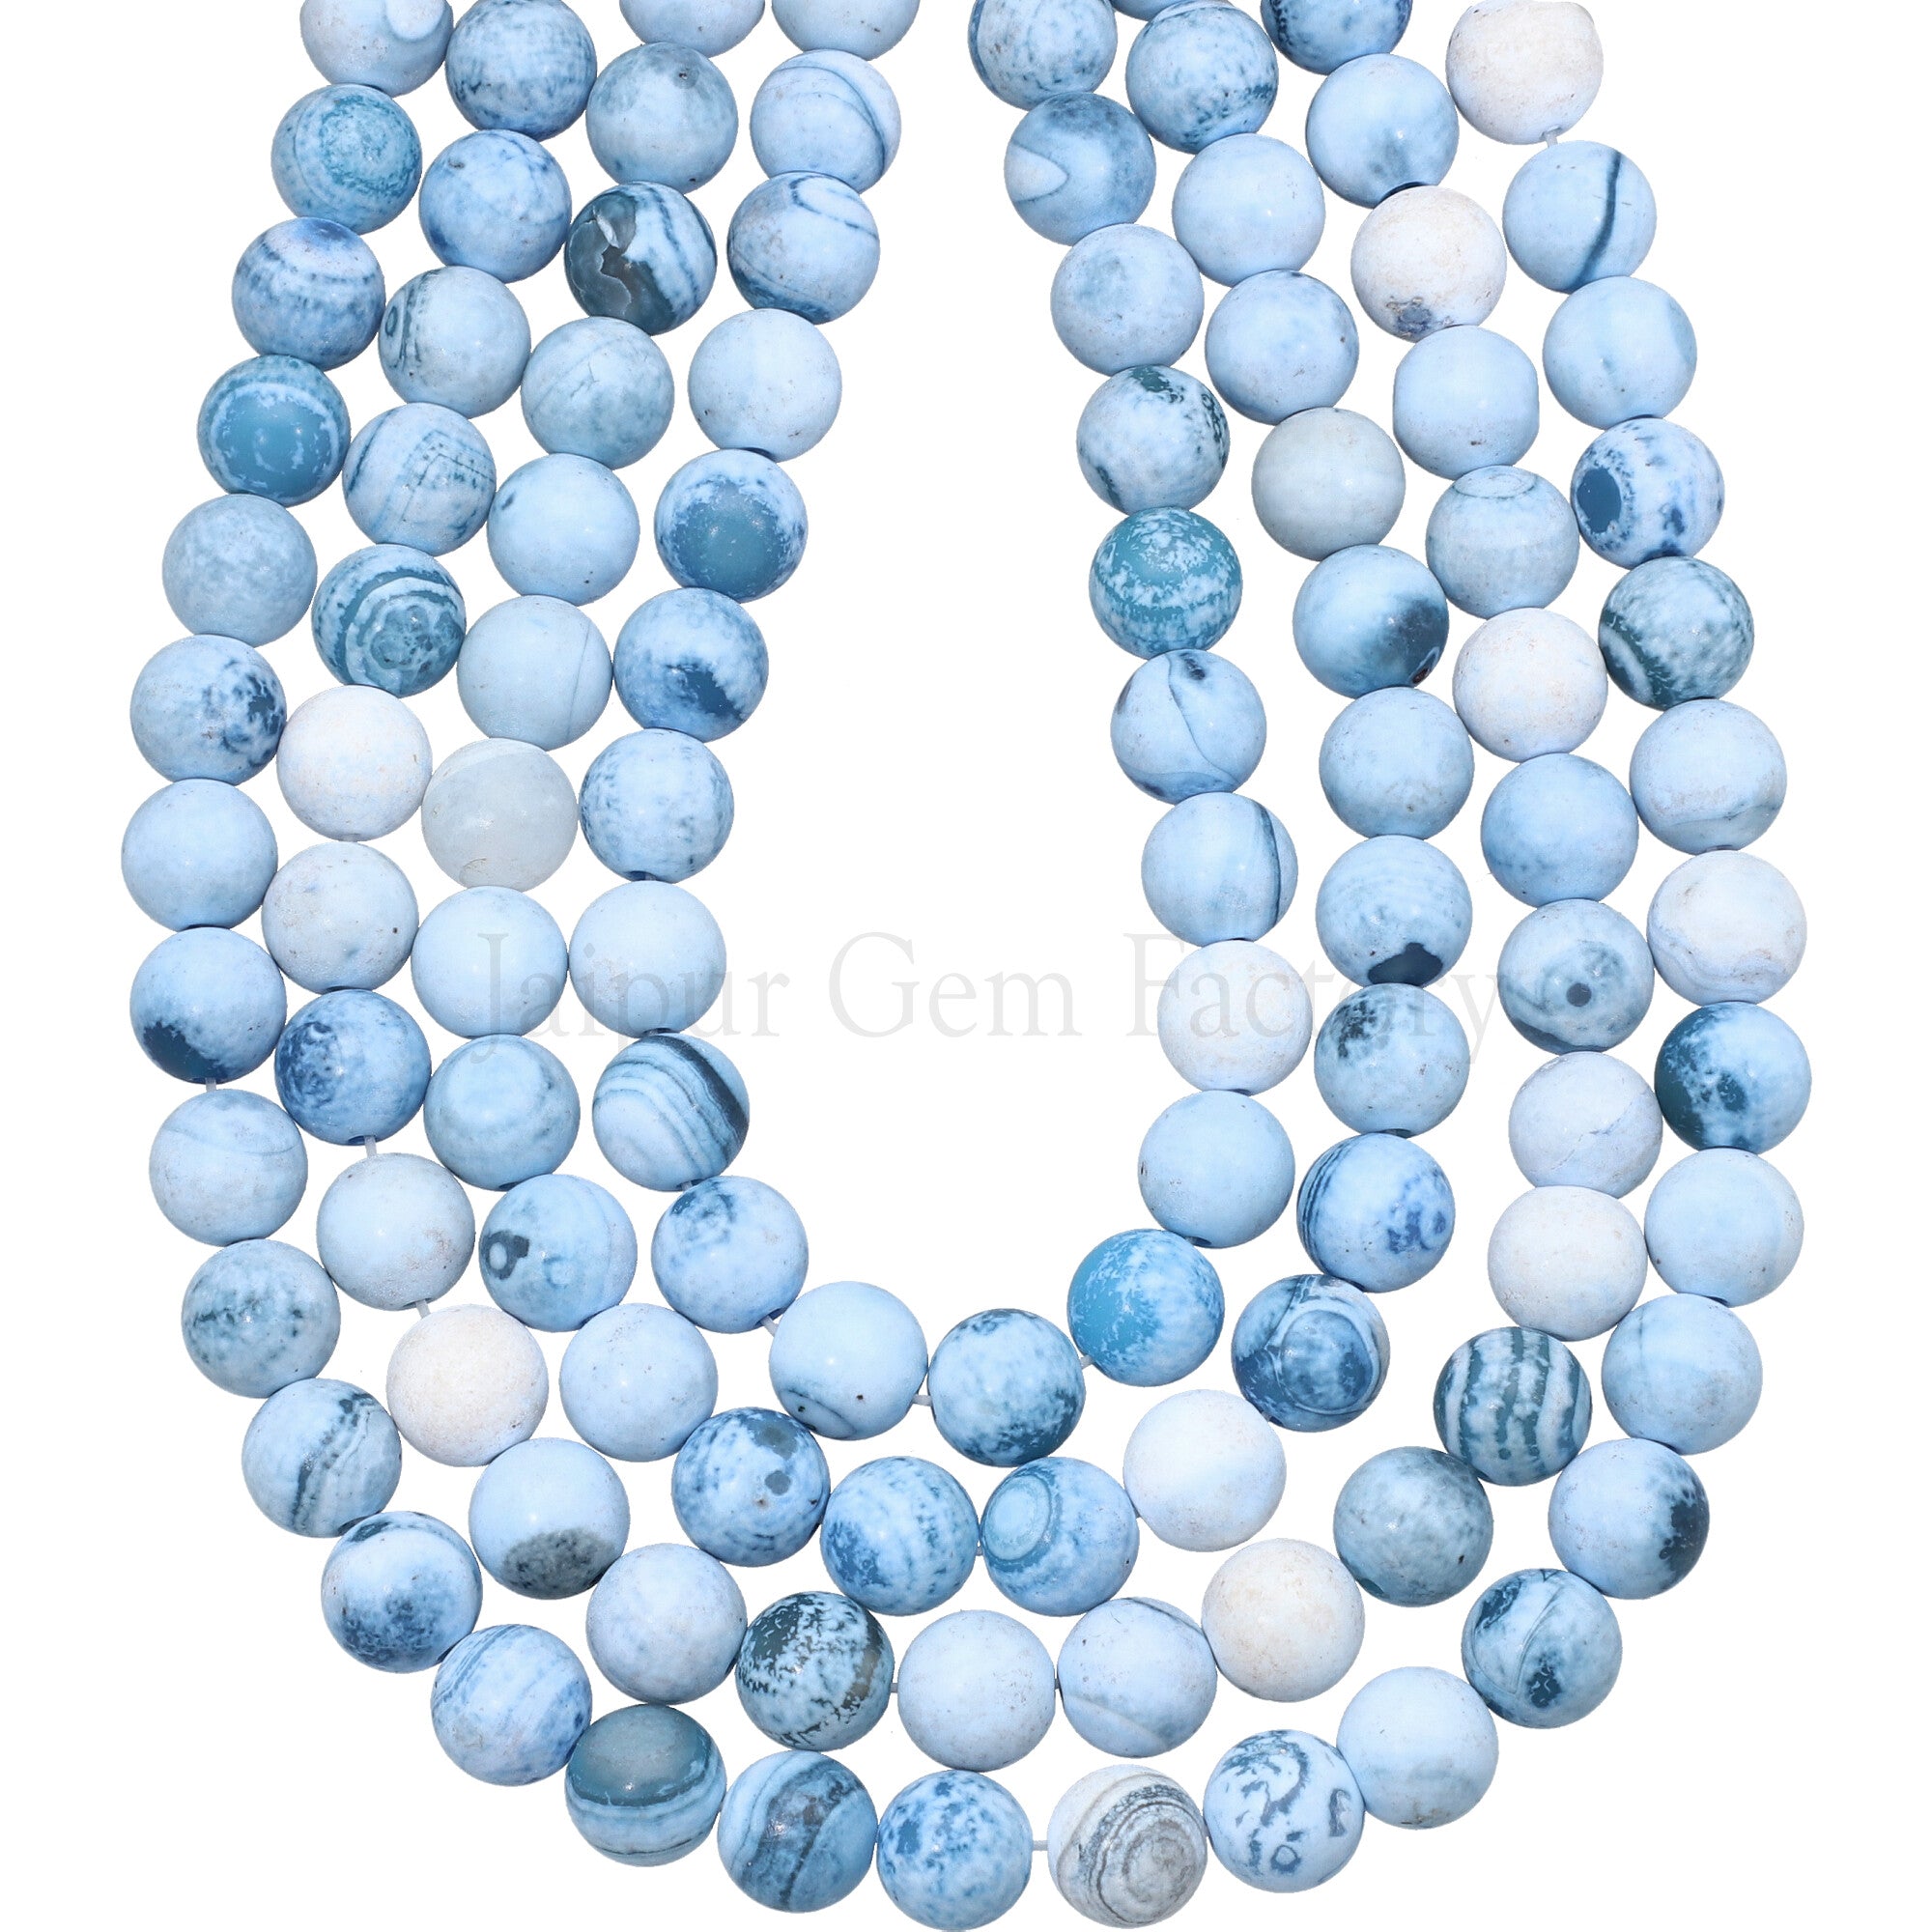 8 MM Blue White Lace Agate Smooth Round Beads 15 Inches Strand